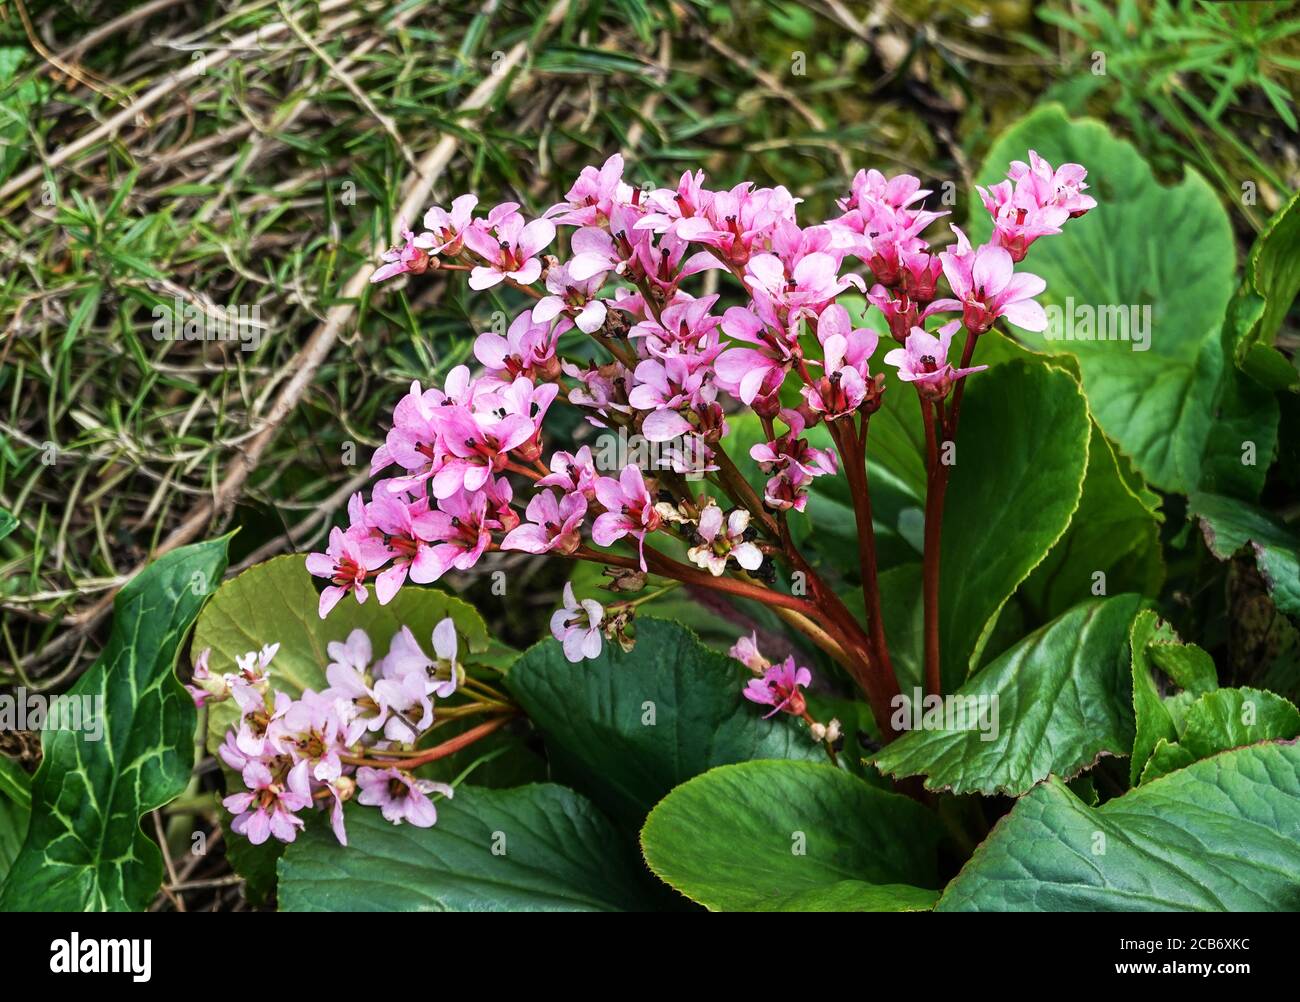 Elephant Ears 'Bergenia cordifolia' An evergreen herbaceous perennial originally from Siberia.Good ground cover.South-west France. Stock Photo